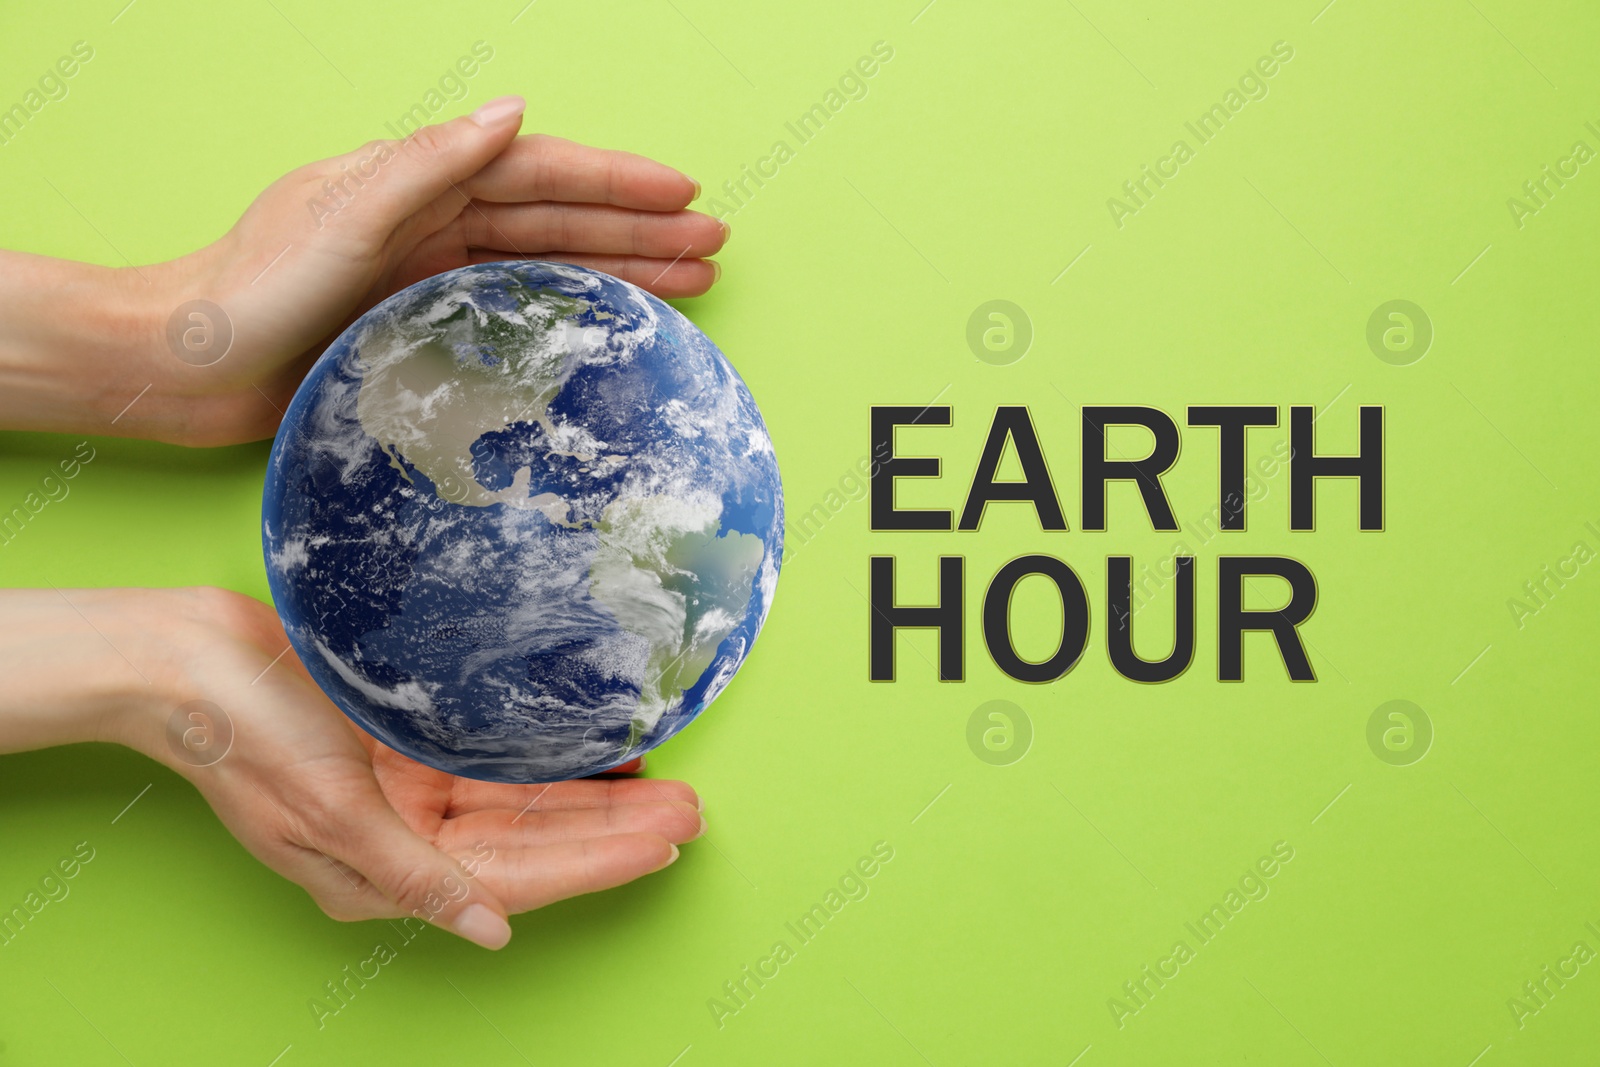 Image of Take care of Earth, turn off lights for hour. Woman with globe illustration on light green background, top view